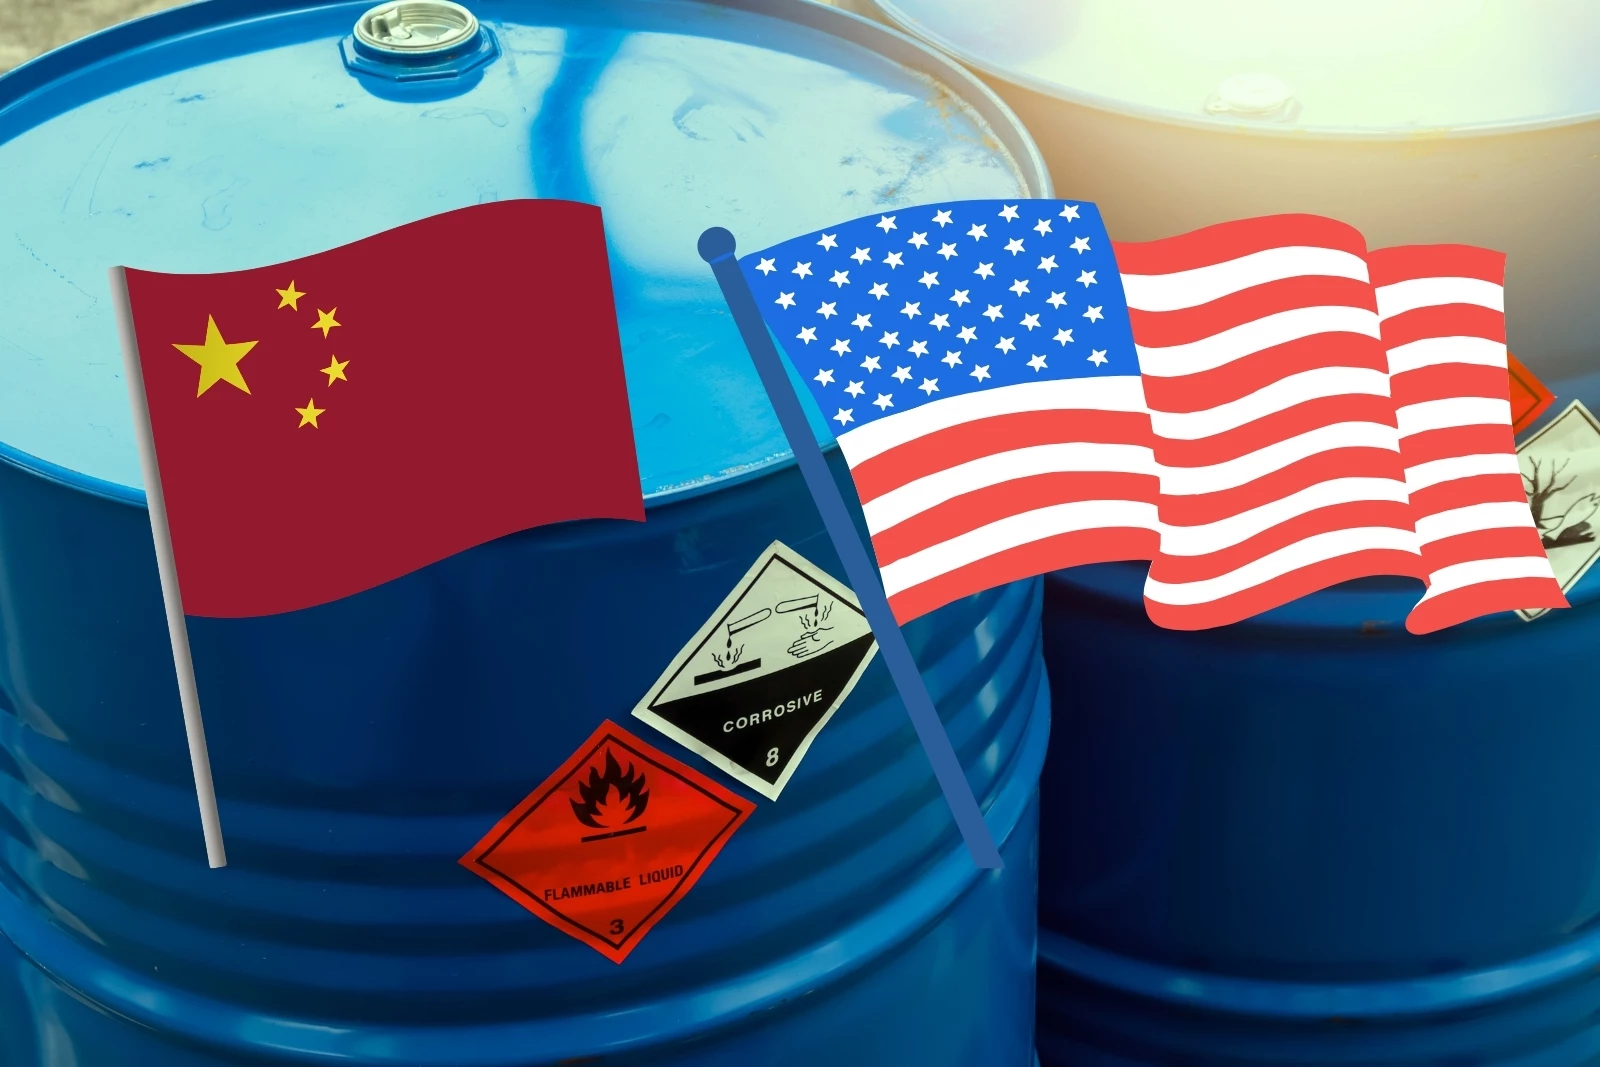 NJ business owner admits bringing mislabeled hazardous chemicals from China into US